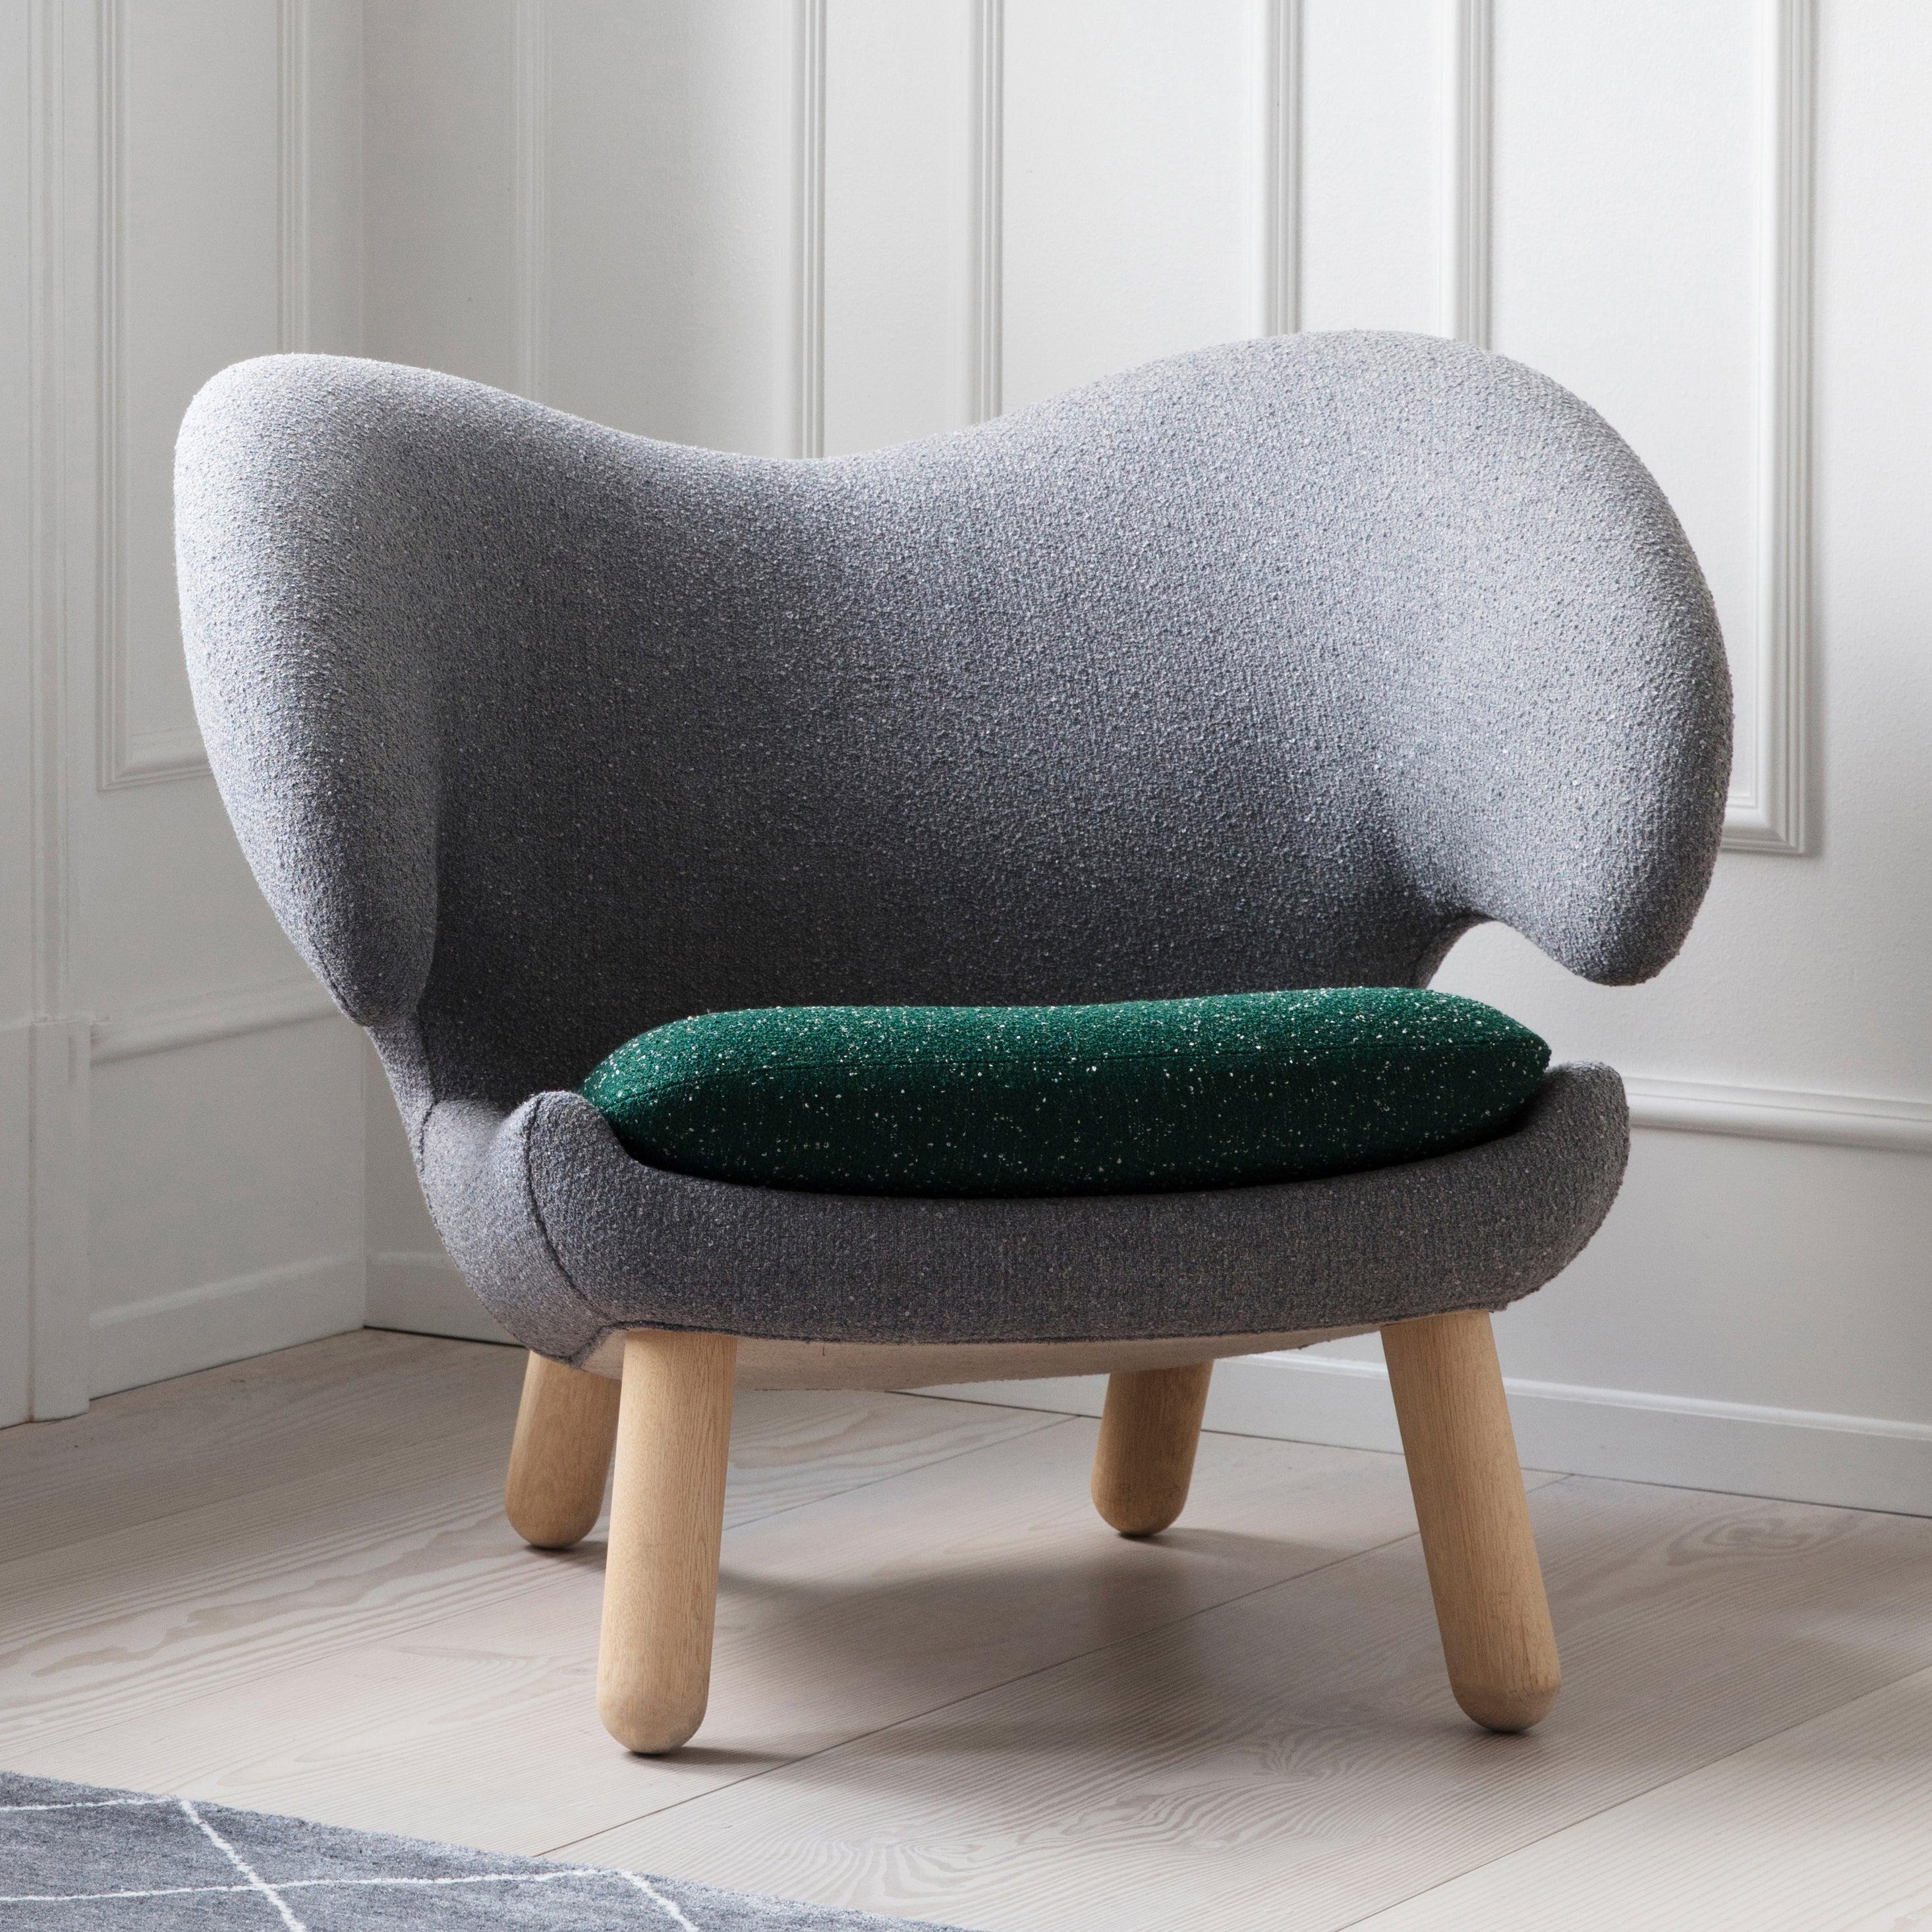 Danish Set of Two Pelican Chairs in Fabric and Wood by Finn Juhl